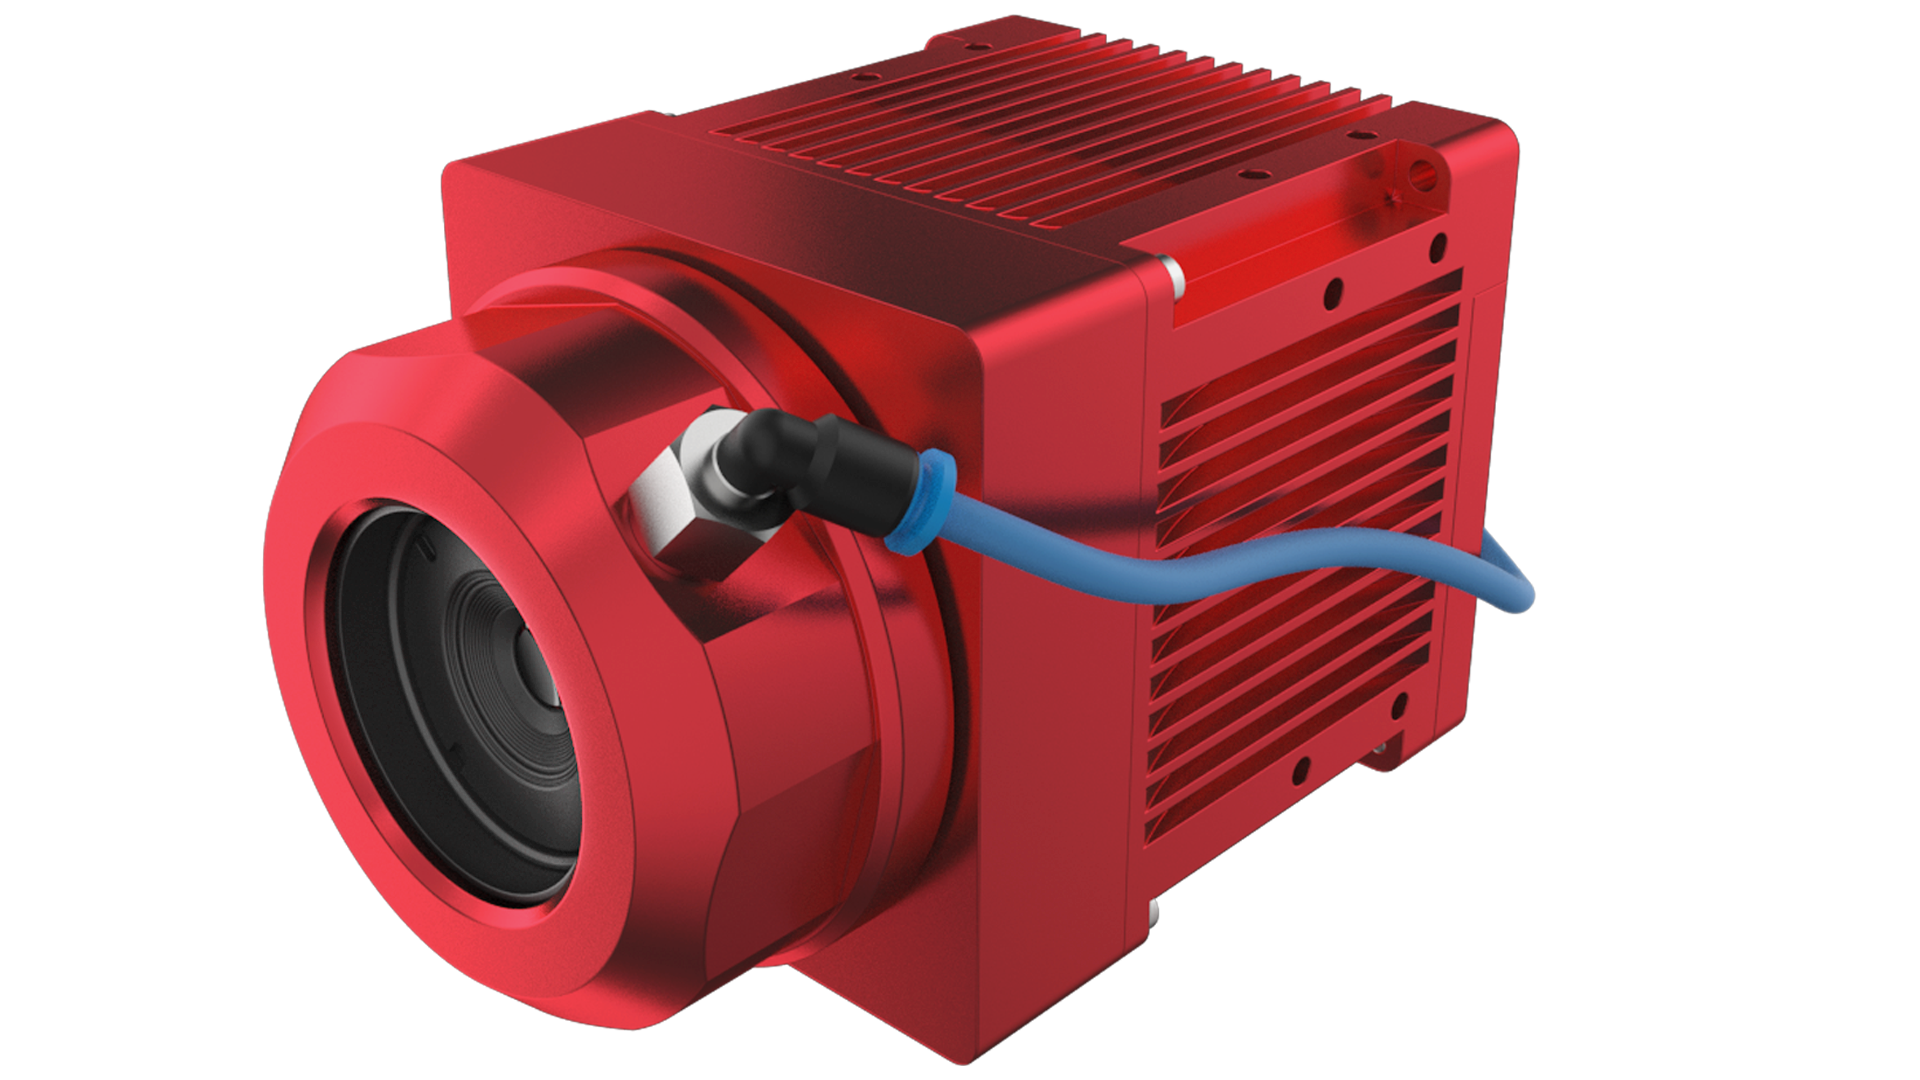 IRSX Series – Smart Infrared Cameras for Industry 4.0